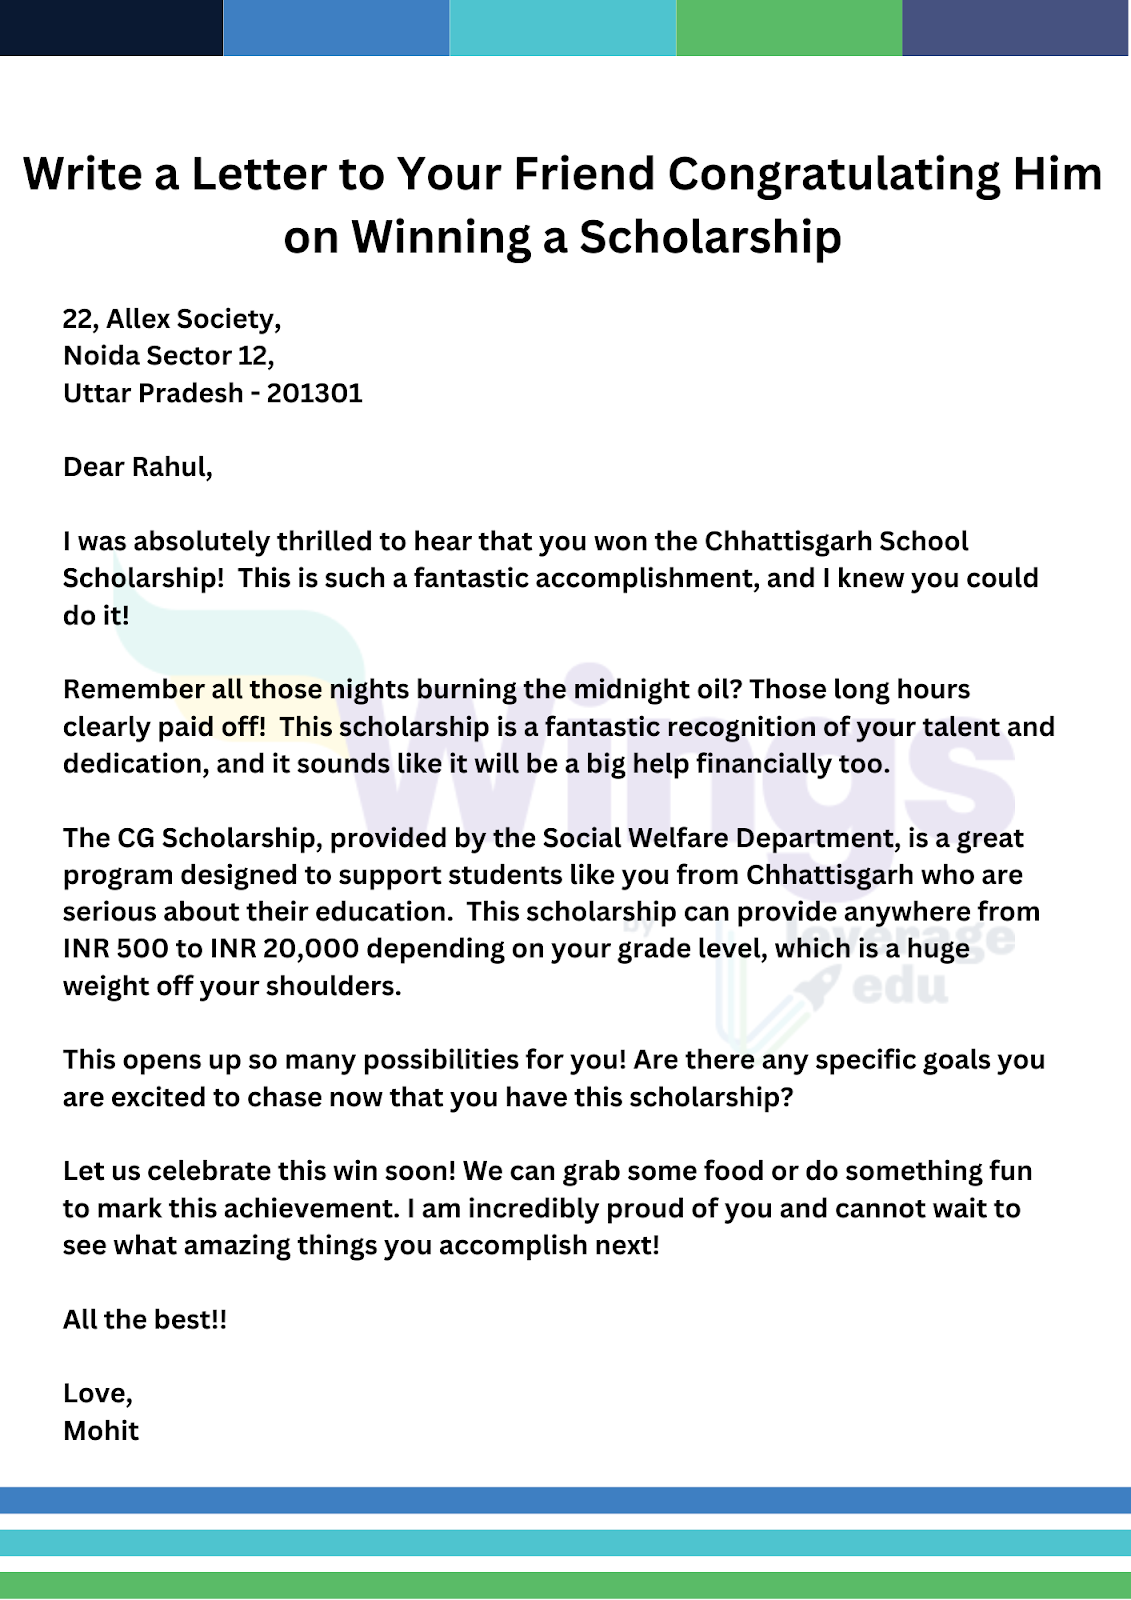 Write a Letter to Your Friend Congratulating Him on Winning a Scholarship